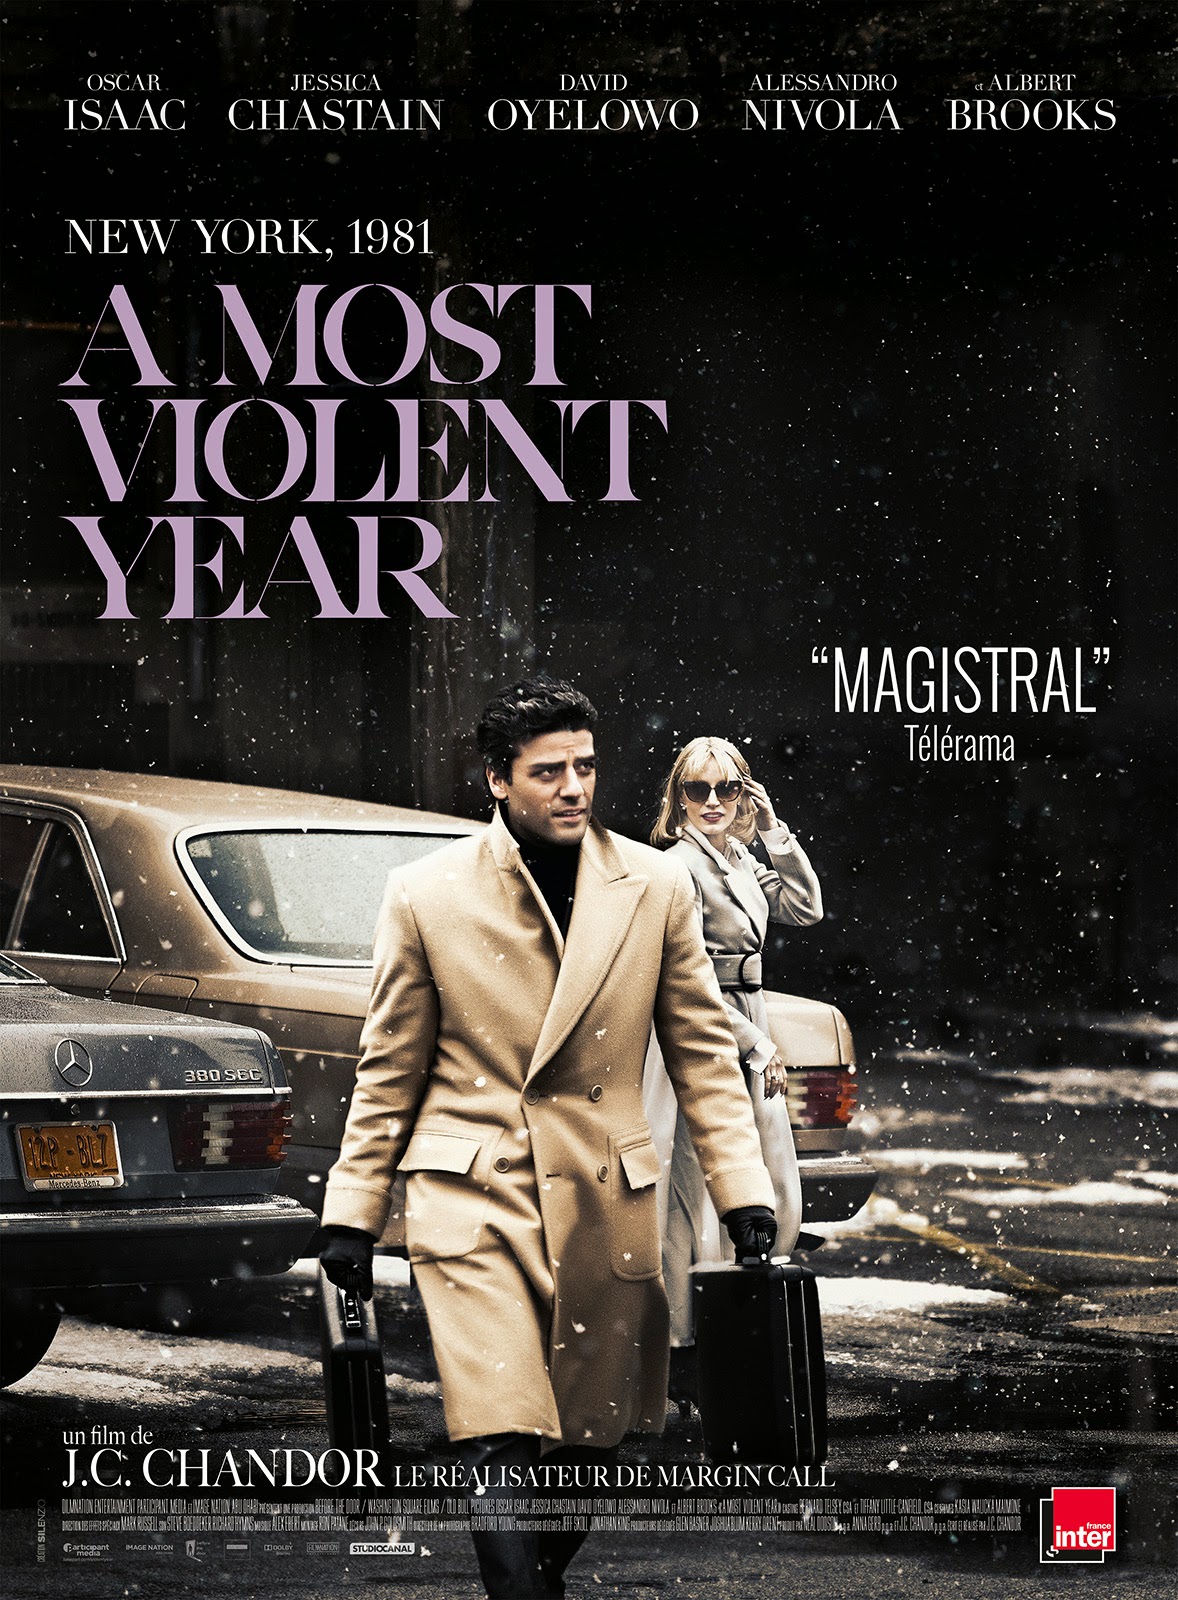 http://fuckingcinephiles.blogspot.fr/2014/12/critique-most-violent-year.html